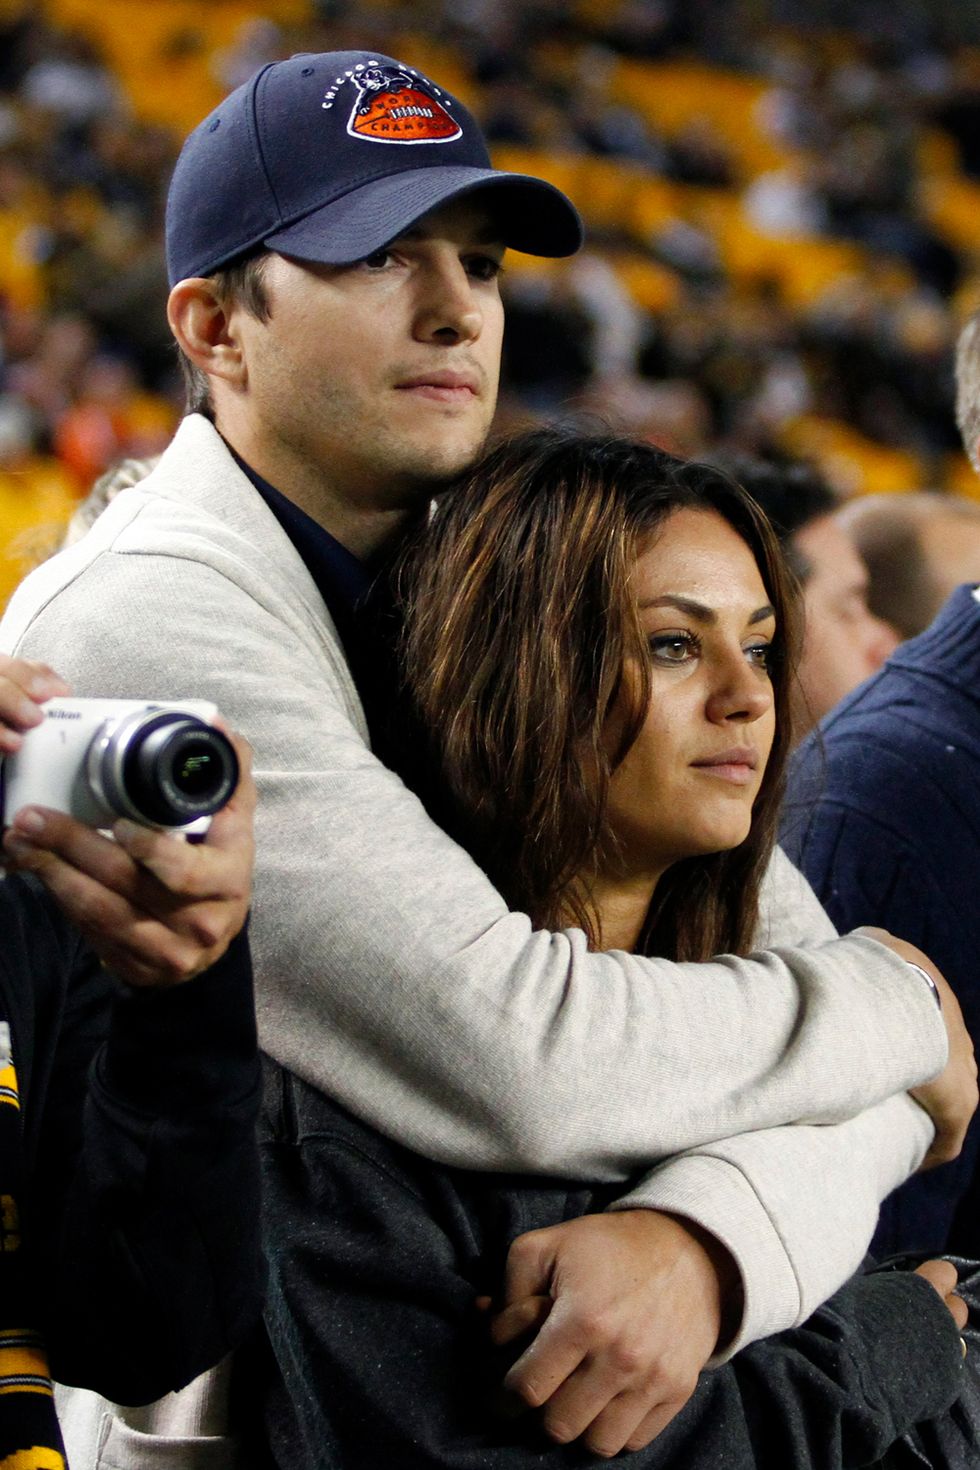 pittsburgh, pa   september 22  ashton kutcher and mila kunis look on from the sidelines before the game between the chicago bears and the pittsburgh steelers on september 22, 2013 at heinz field in pittsburgh, pennsylvania  photo by justin k allergetty images